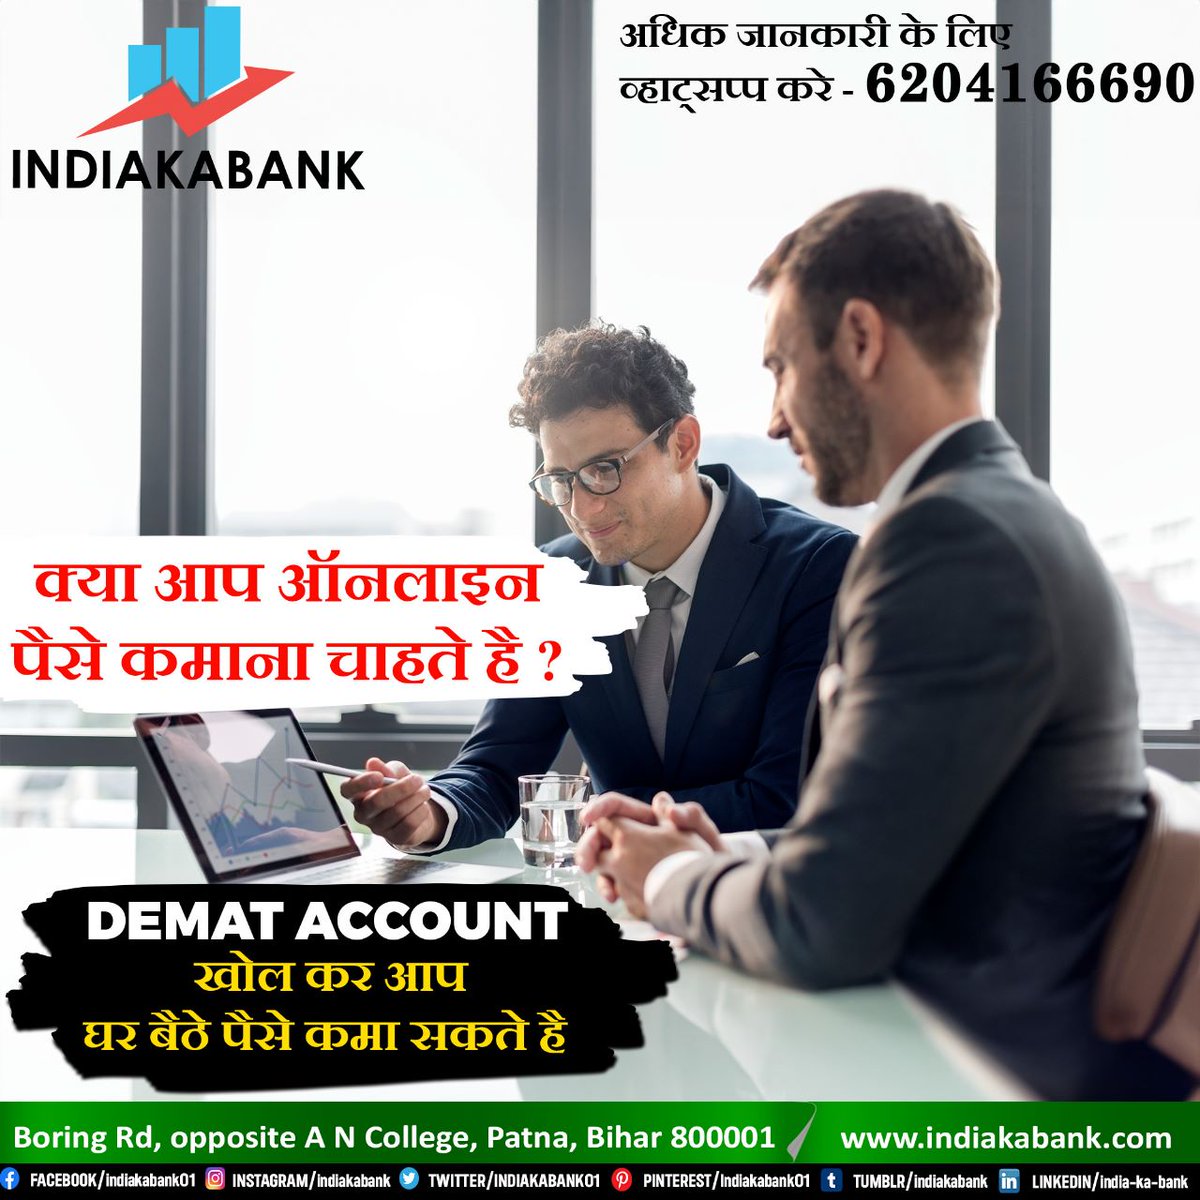 indiakabank.com
INDIAKABANK

We offer you end to end solutions for AEPS, UPI, payment gateway and much more.

#accountinbank #accounting #AccountOpening #accountservices #BankofIndia #savingsaccount #demataccount #bankaccount #onlineaccounting #onlineservices